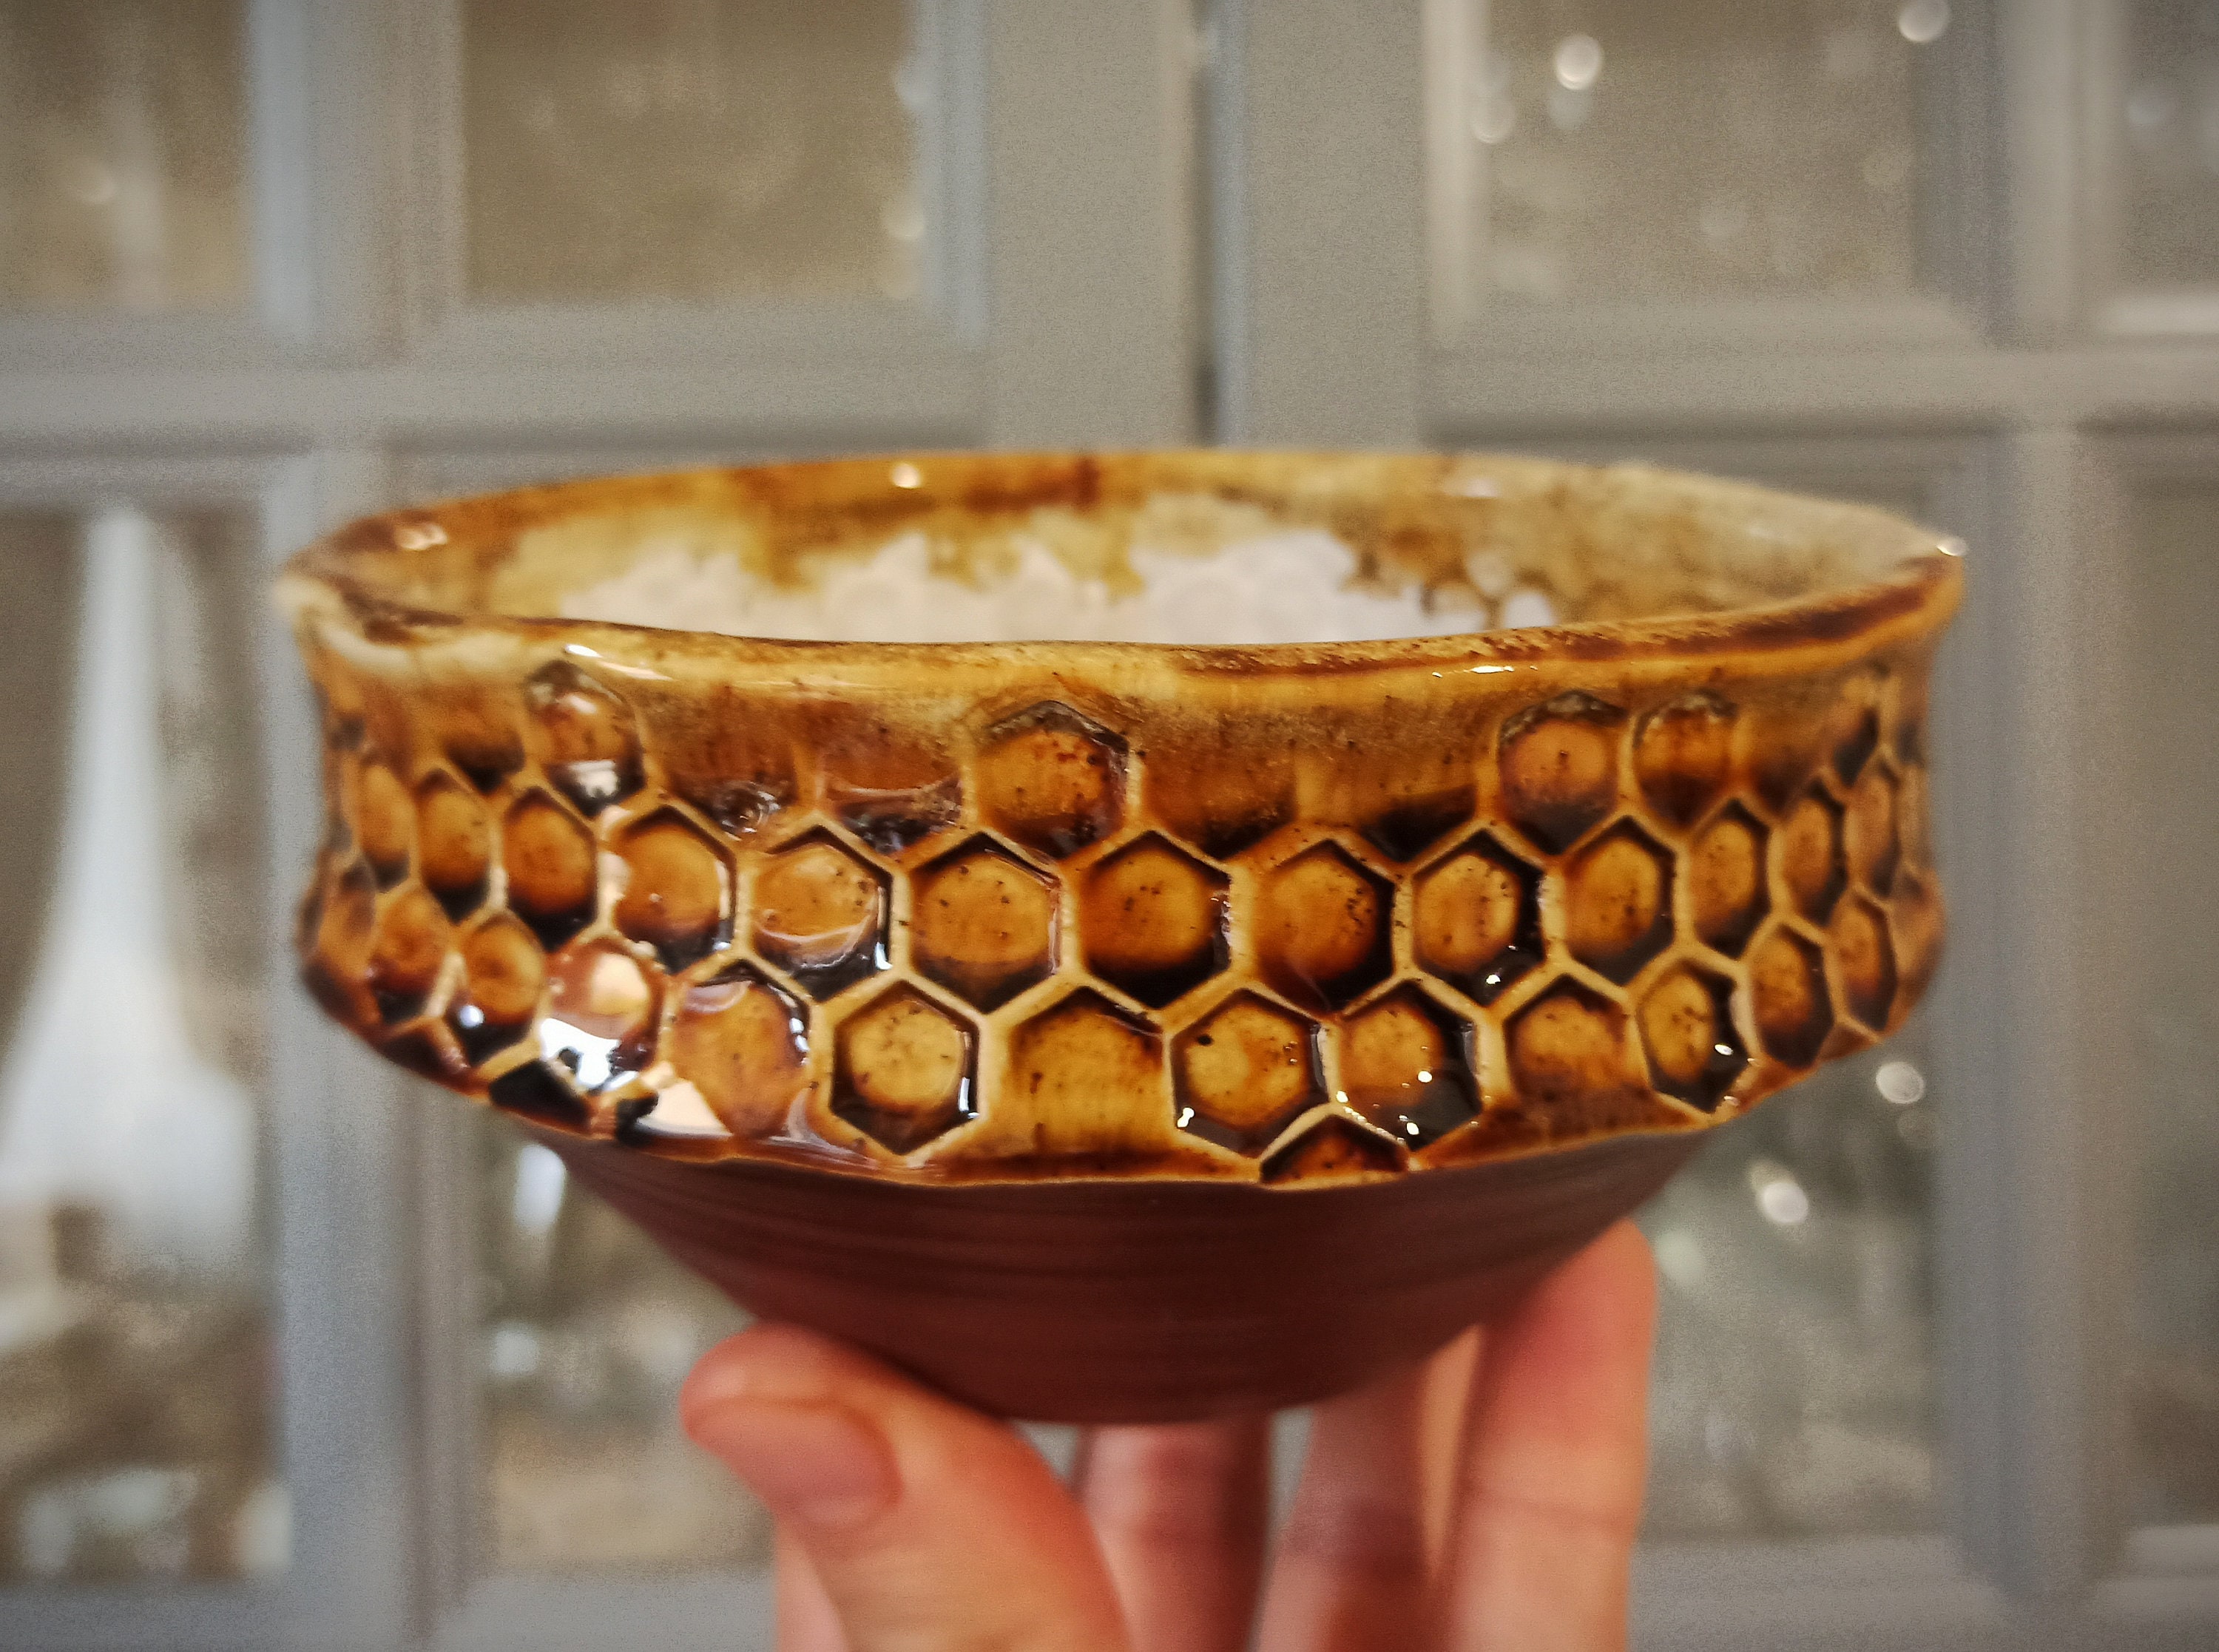 Ceramic Handmade Honey Bee Comb Bowls, Pottery Bowl, Form That Fits Perfectly Into Each Other & Is Suitable For Compact Storage